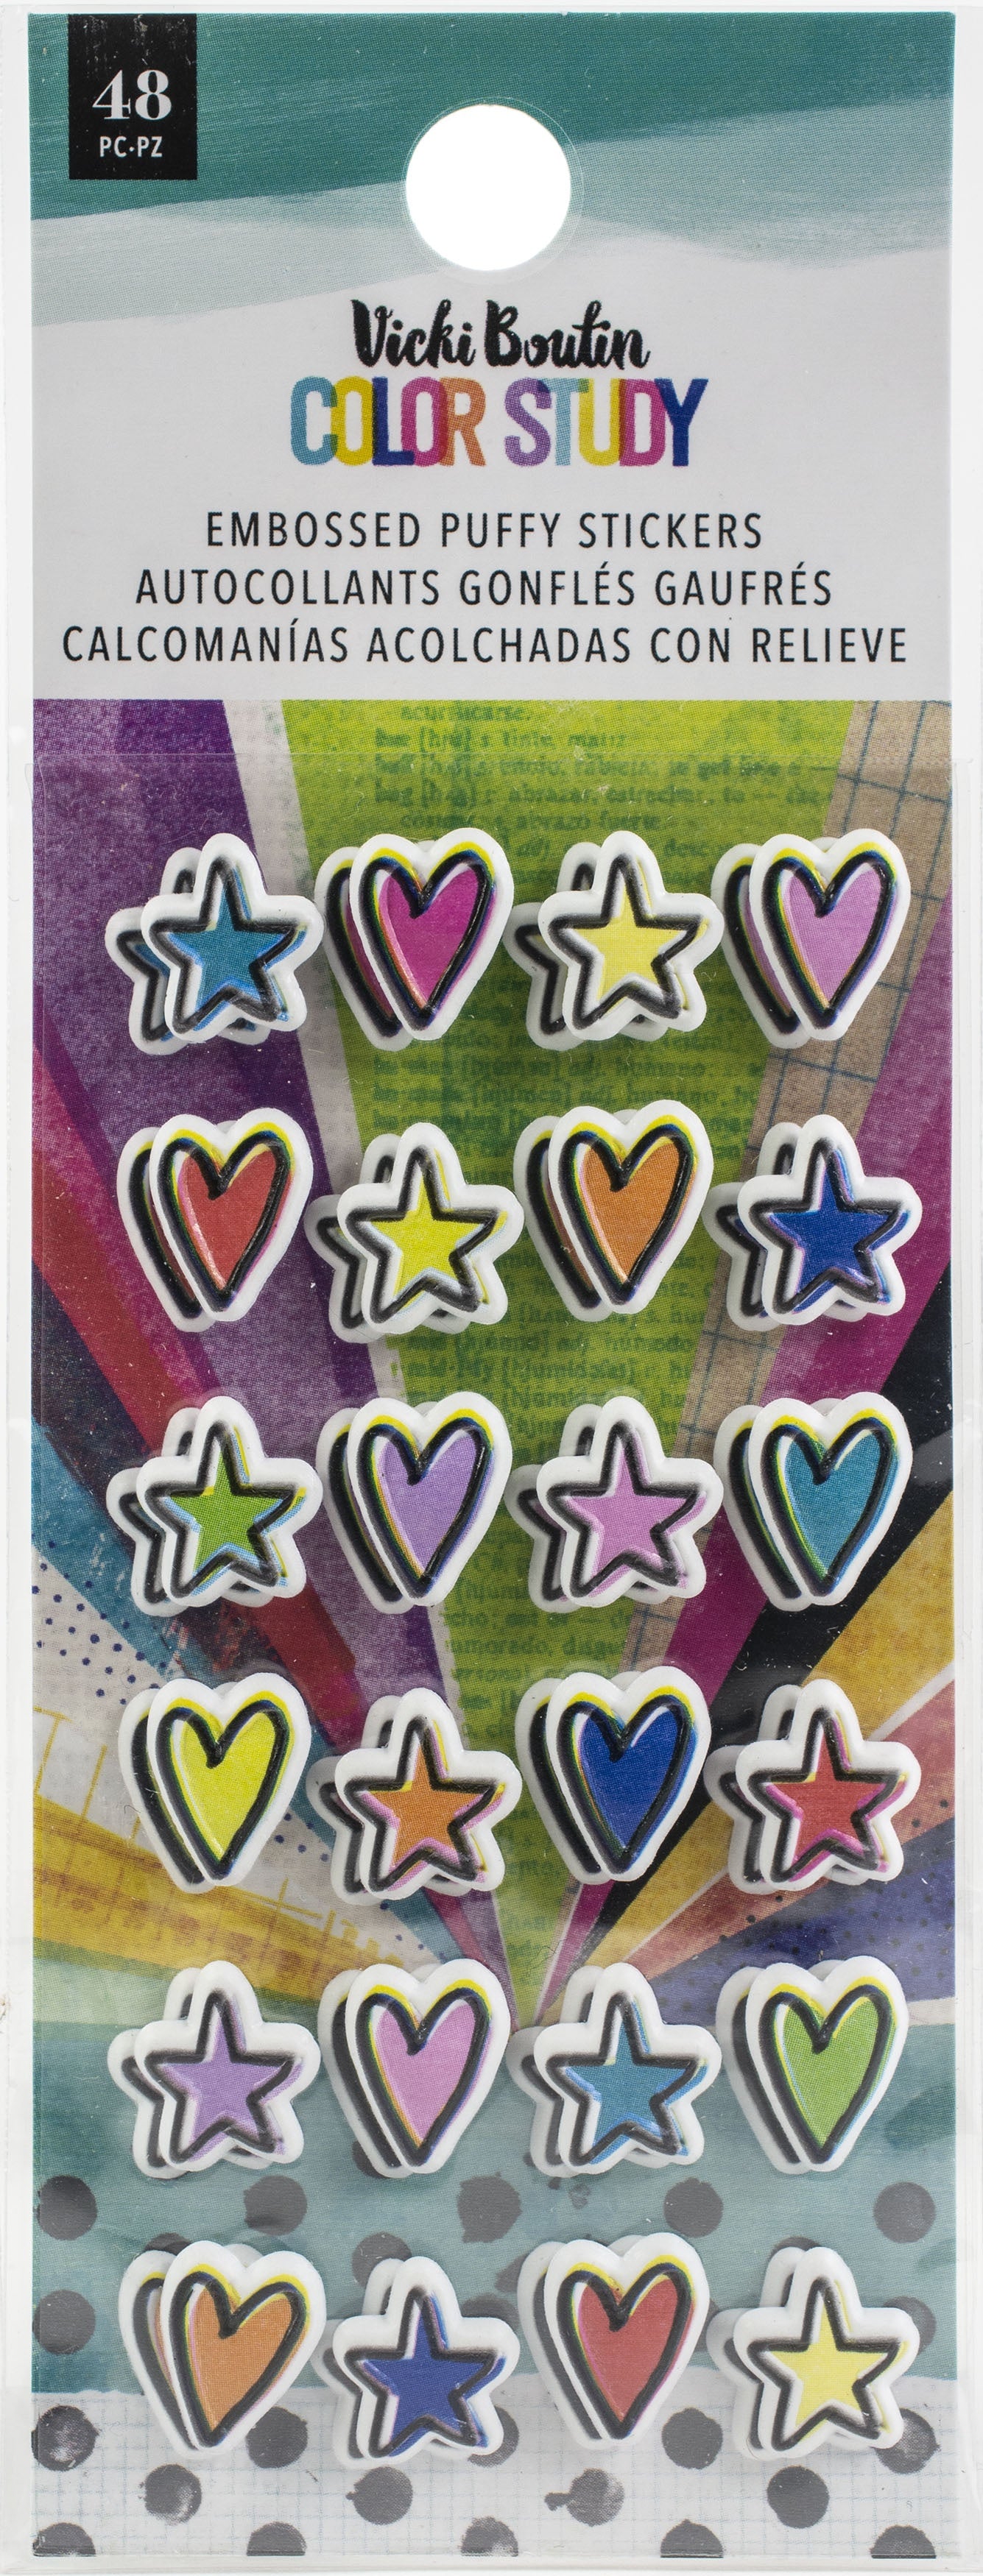 Vicki Boutin Color Study Embossed Puffy Stickers 48/Pkg